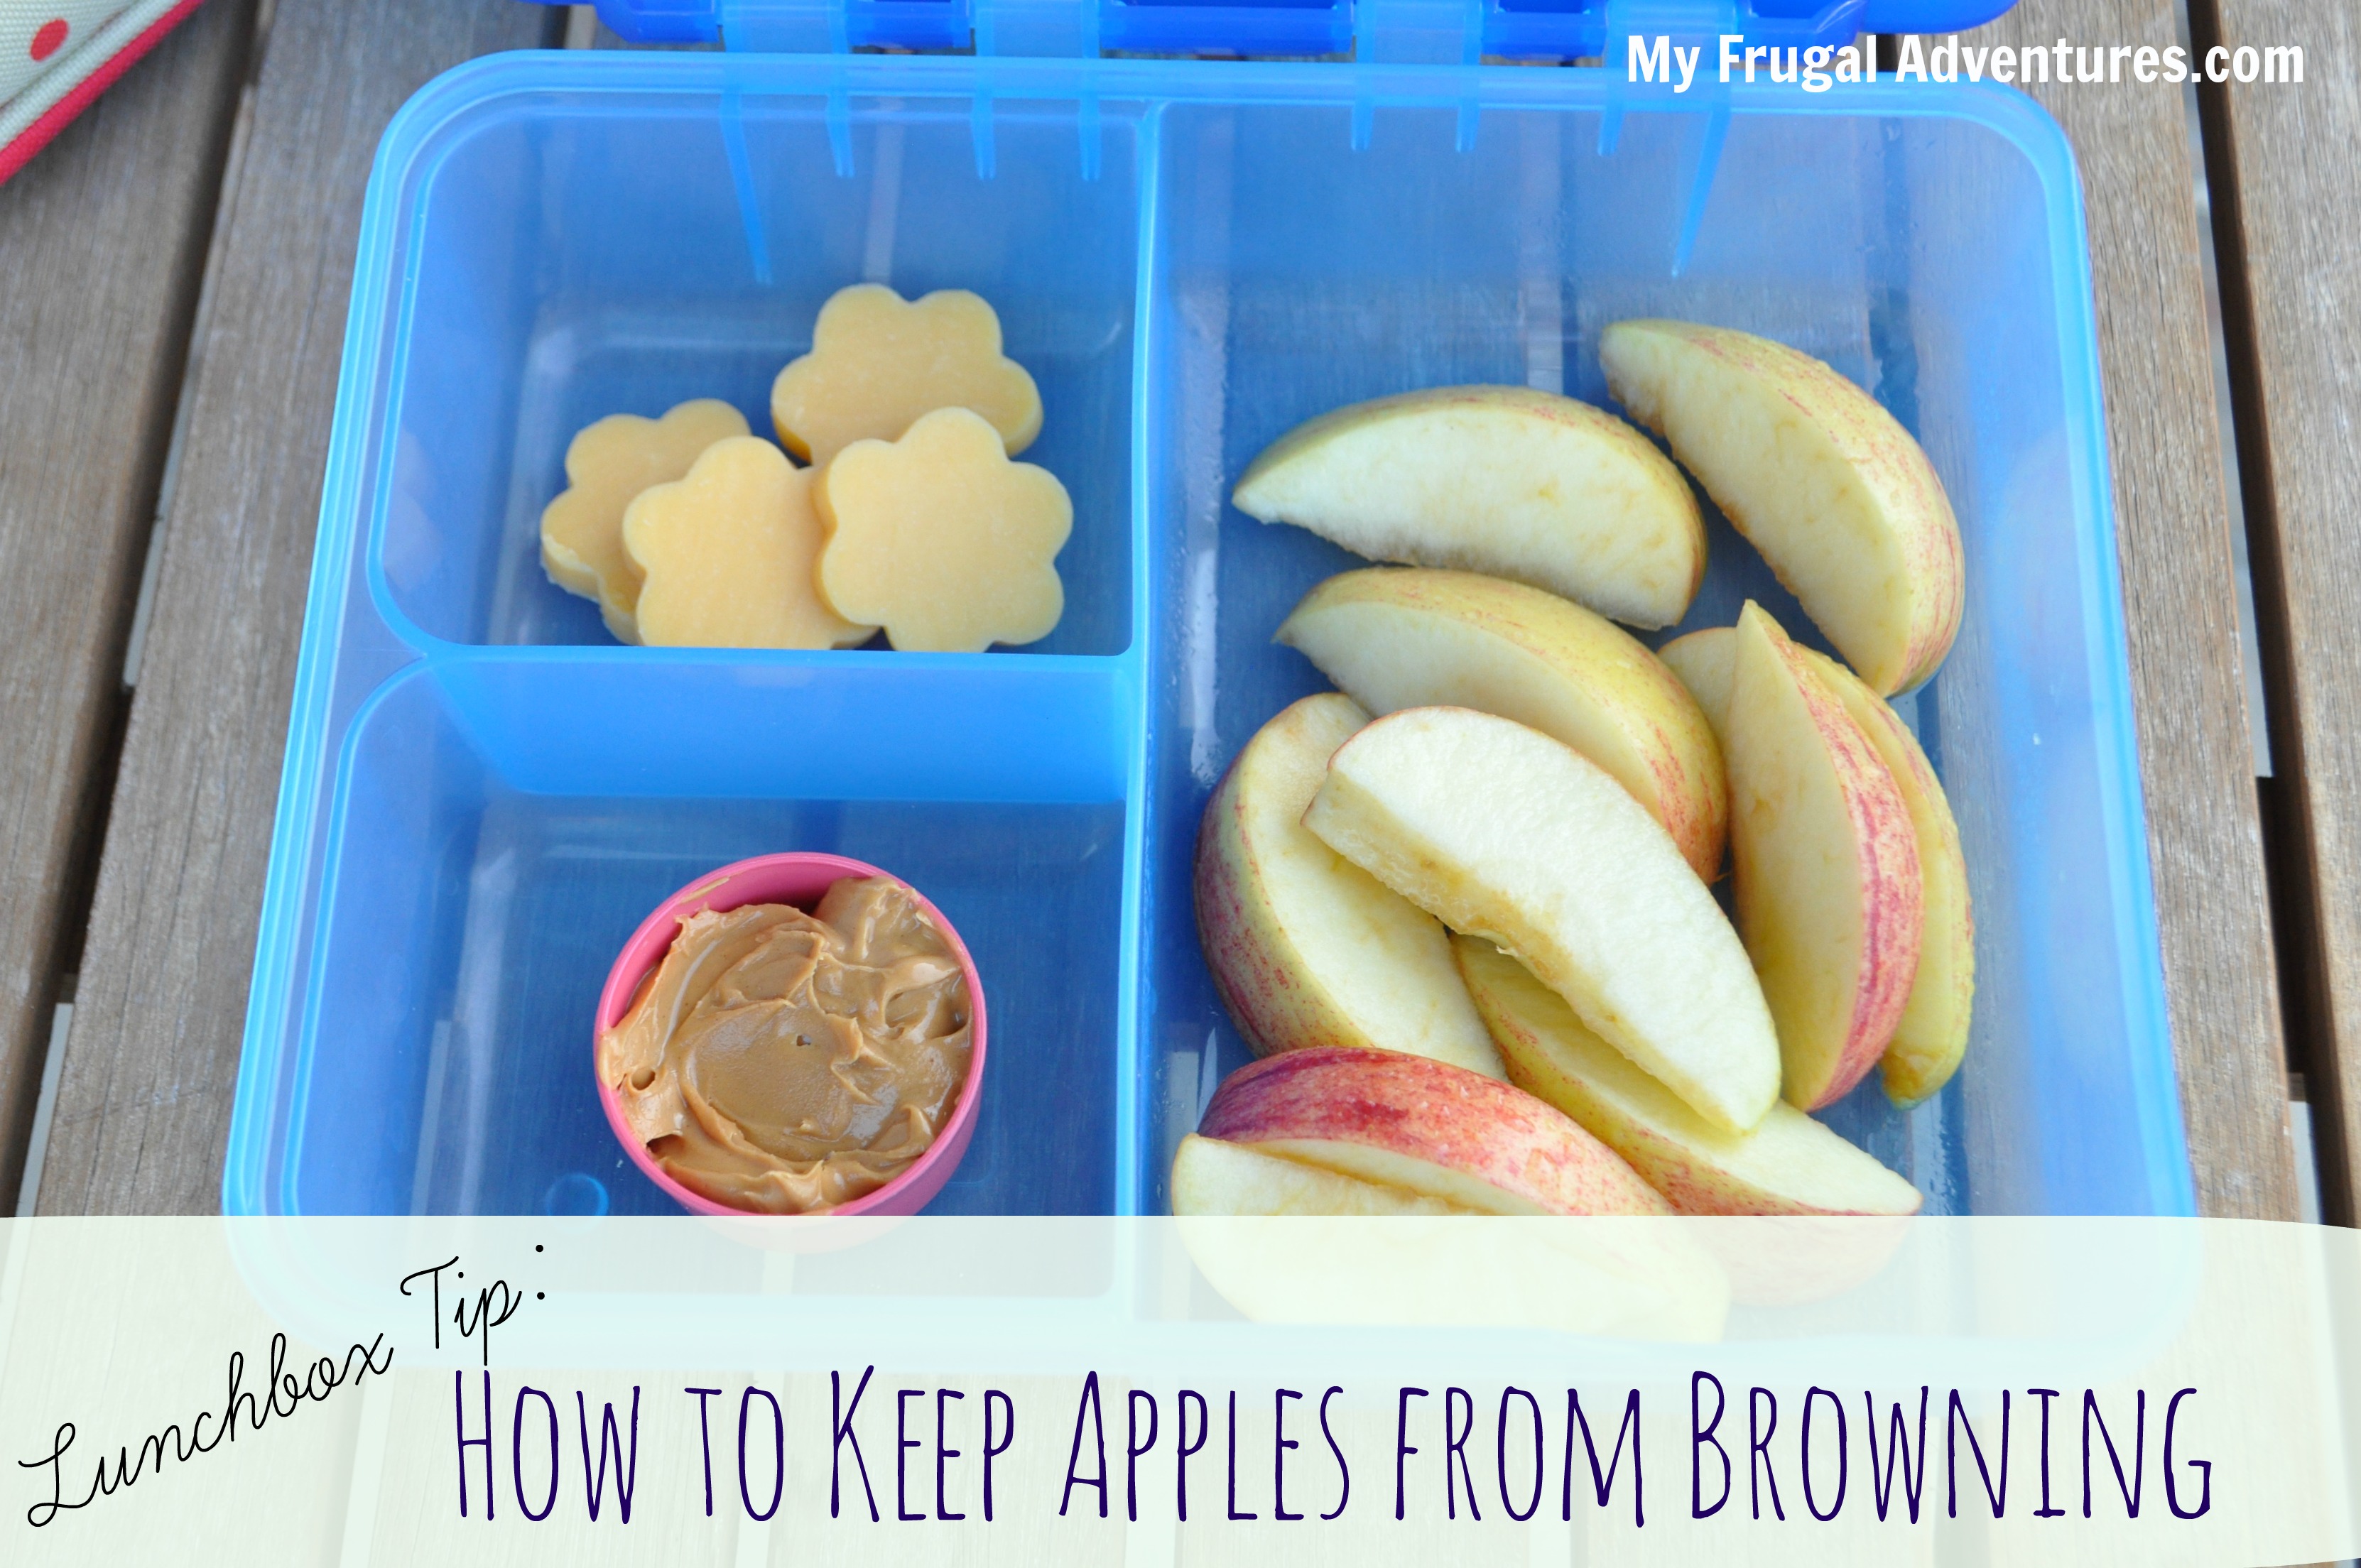 I learned a method to keep apple slices fresh that doesn't involve